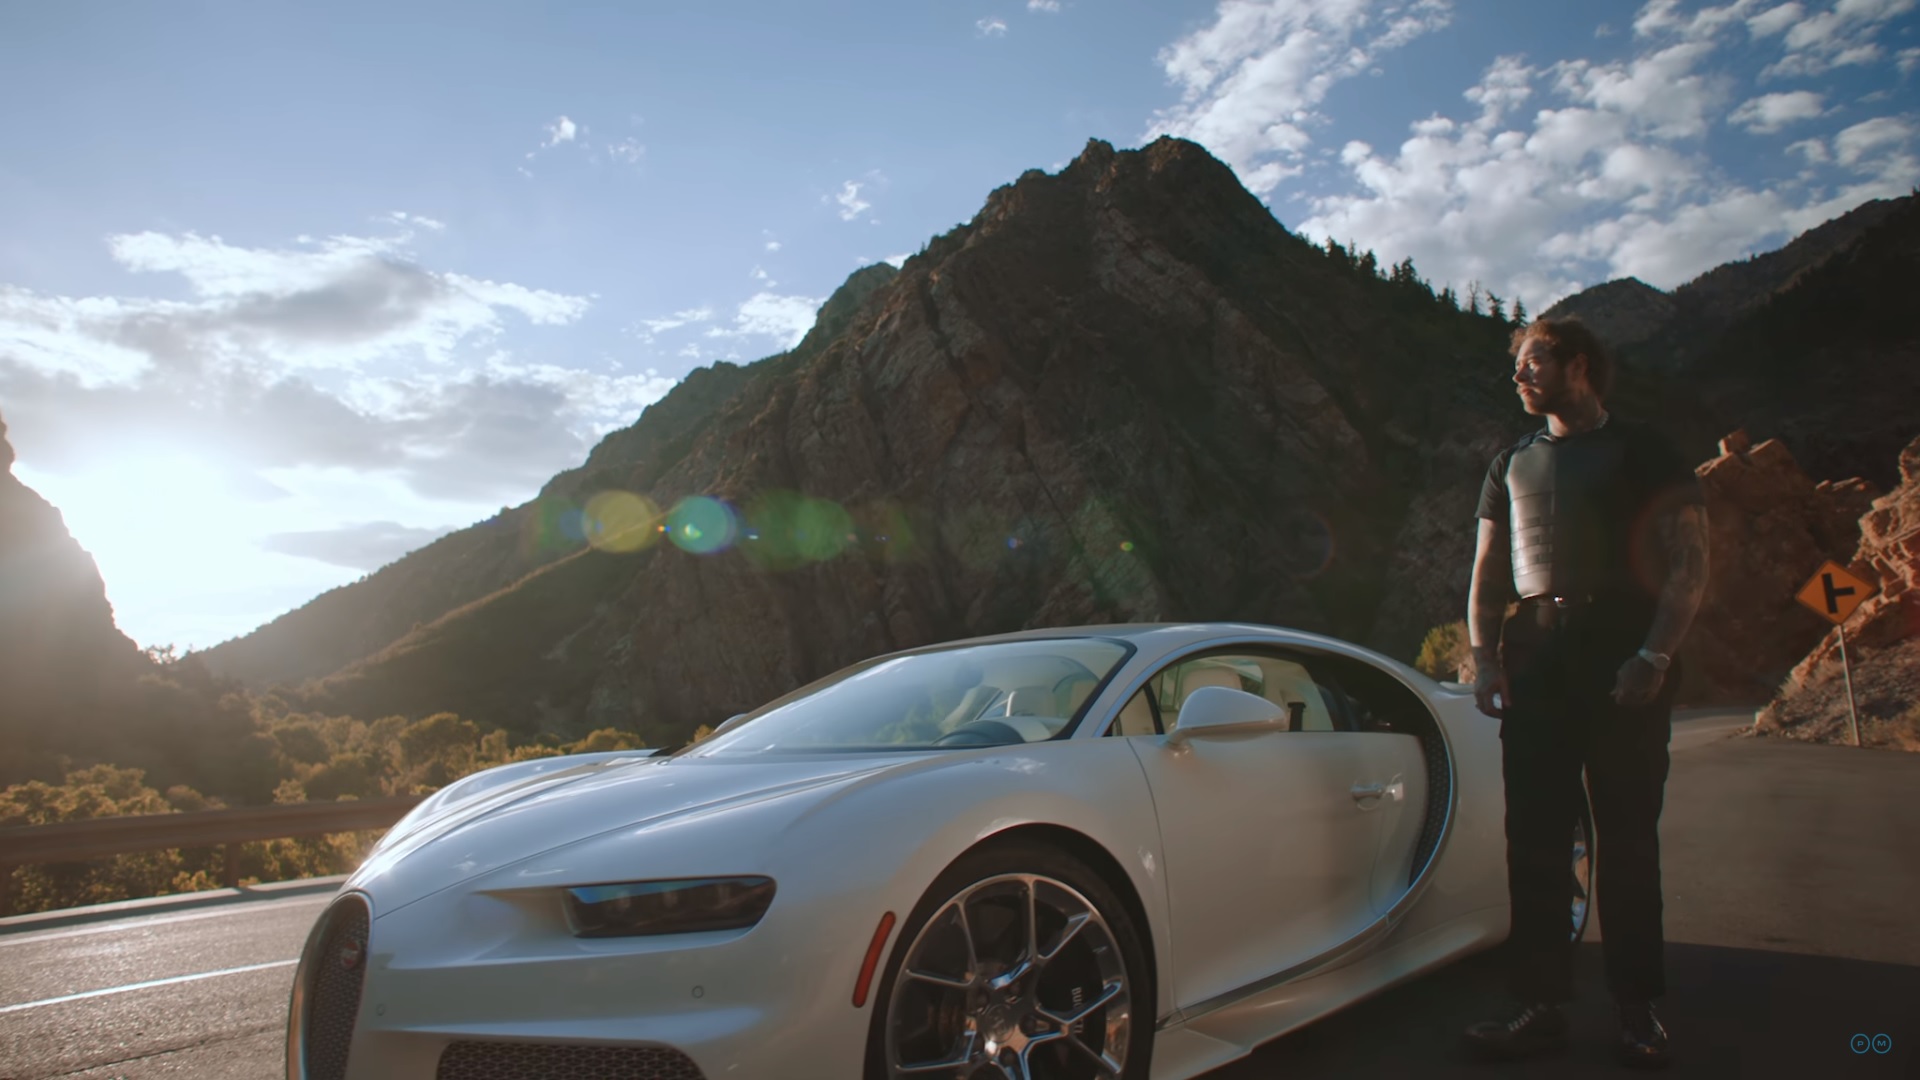 Post Malone stunts in the mountains in his 'Saint-Tropez' video